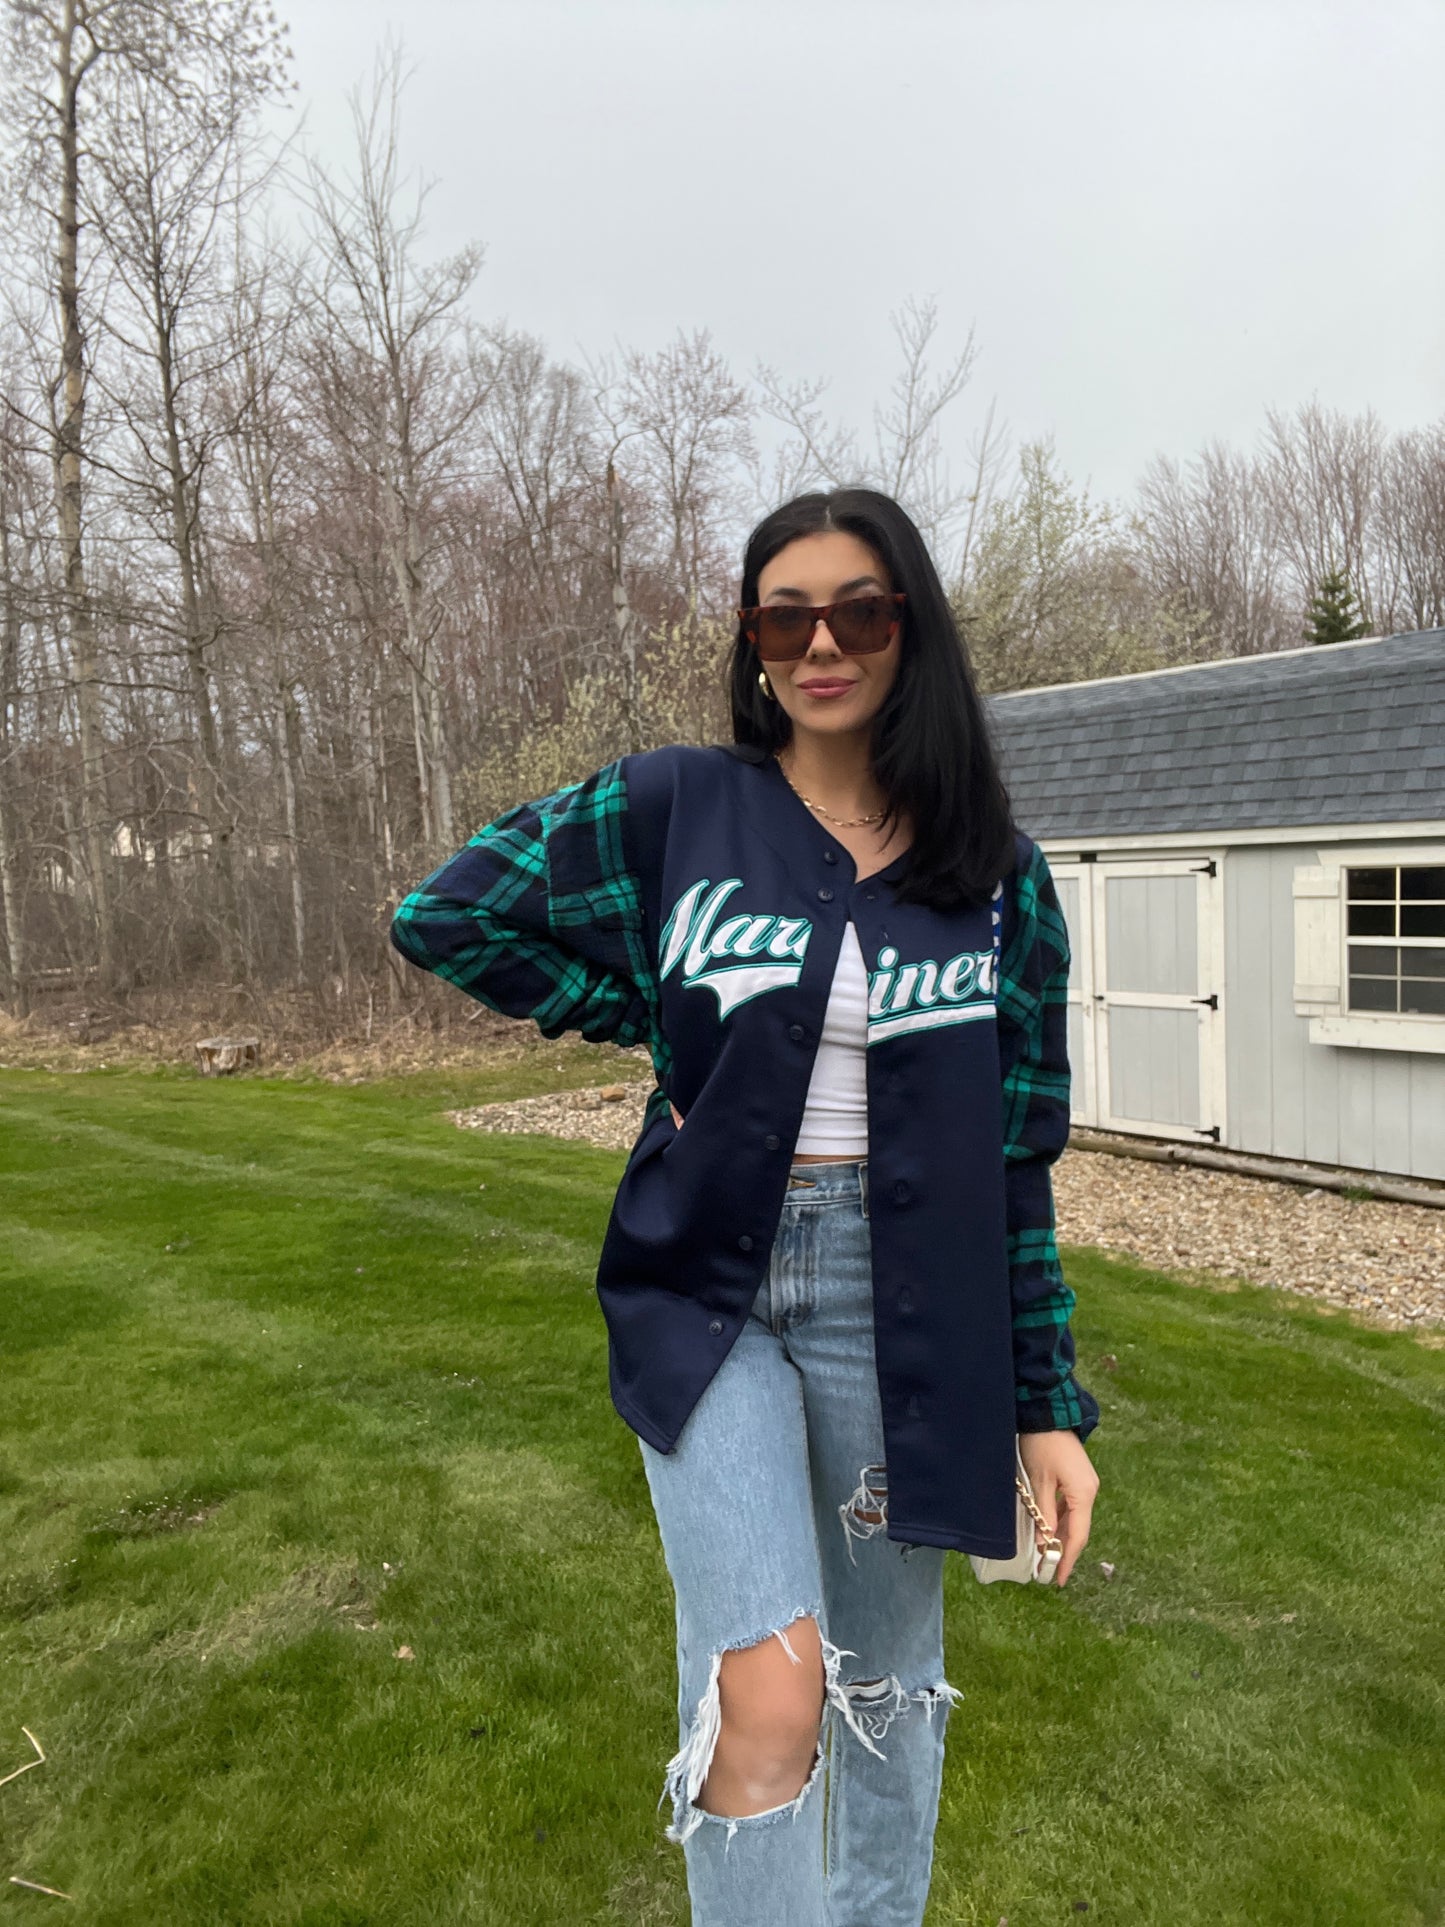 MARINERS JERSEY X FLANNEL